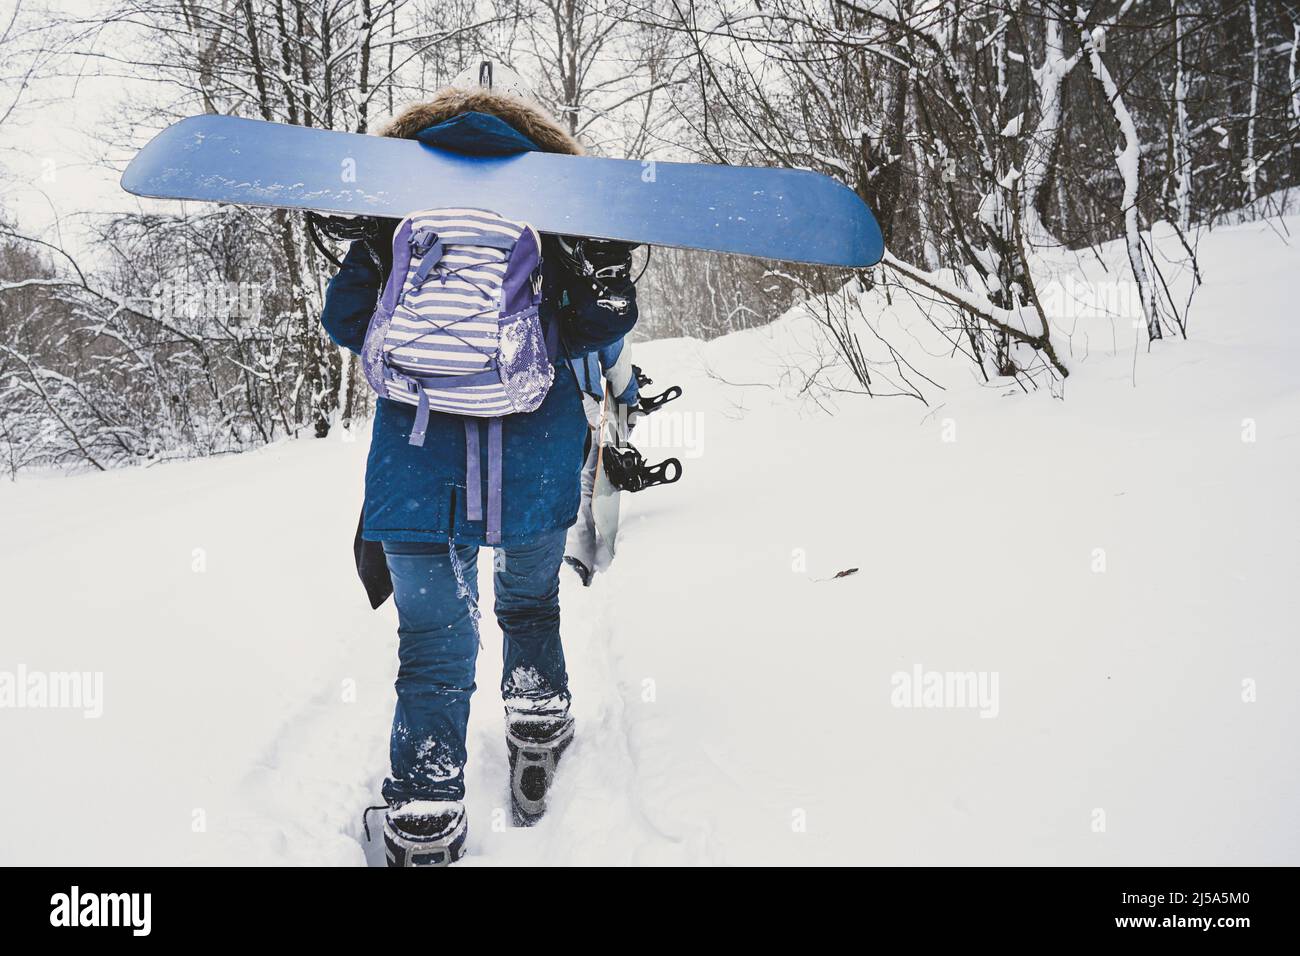 The girl goes with a snowboard vrkah on a snowy slope Stock Photo